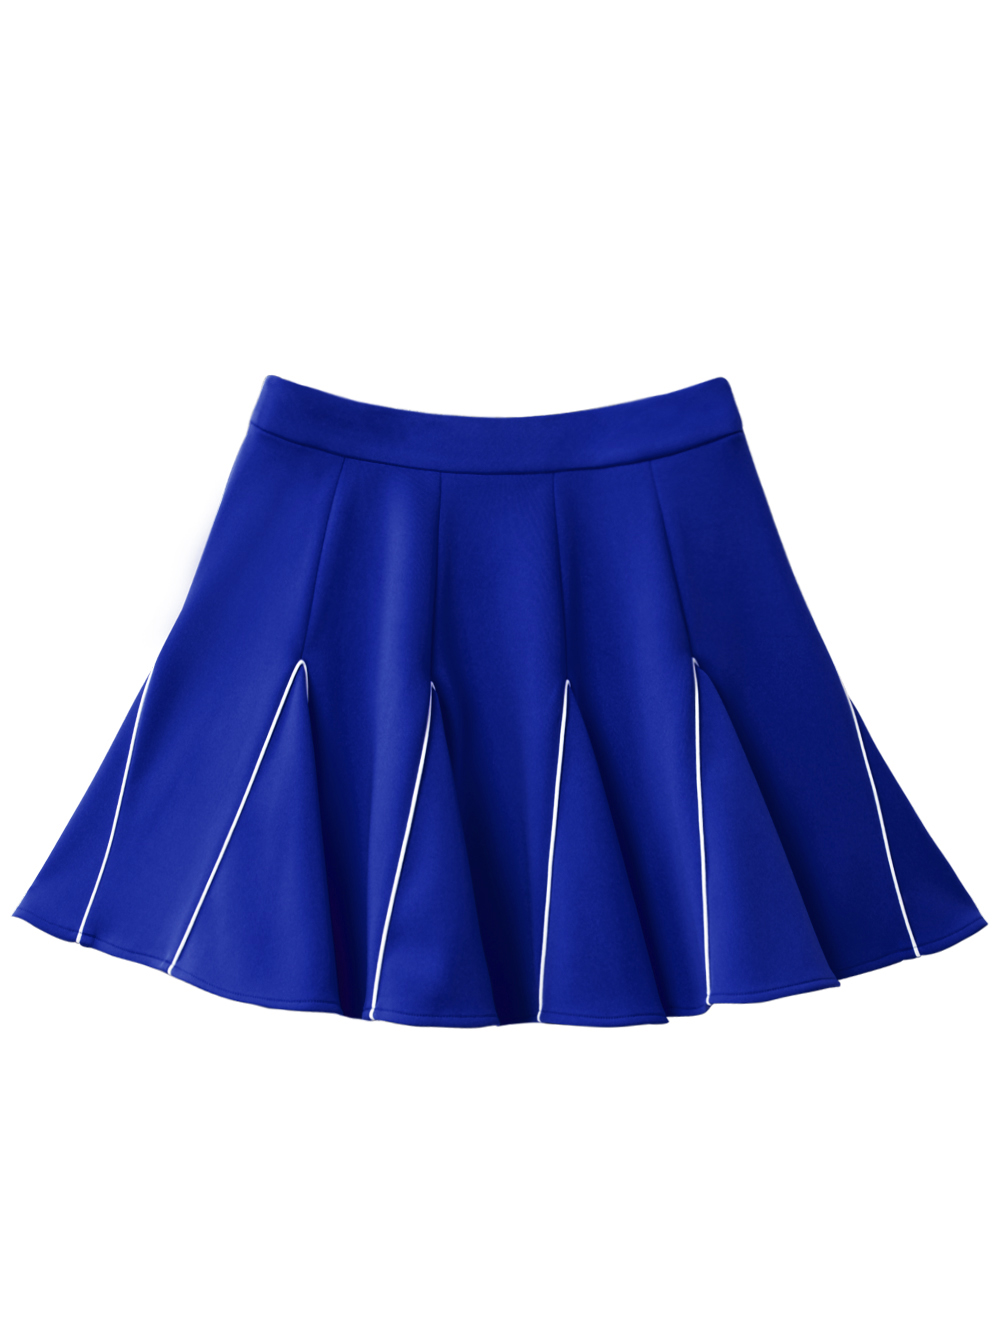 UTAA Wild Panther Color Flare Skirt  :  Blue (UC4SKF326BL)